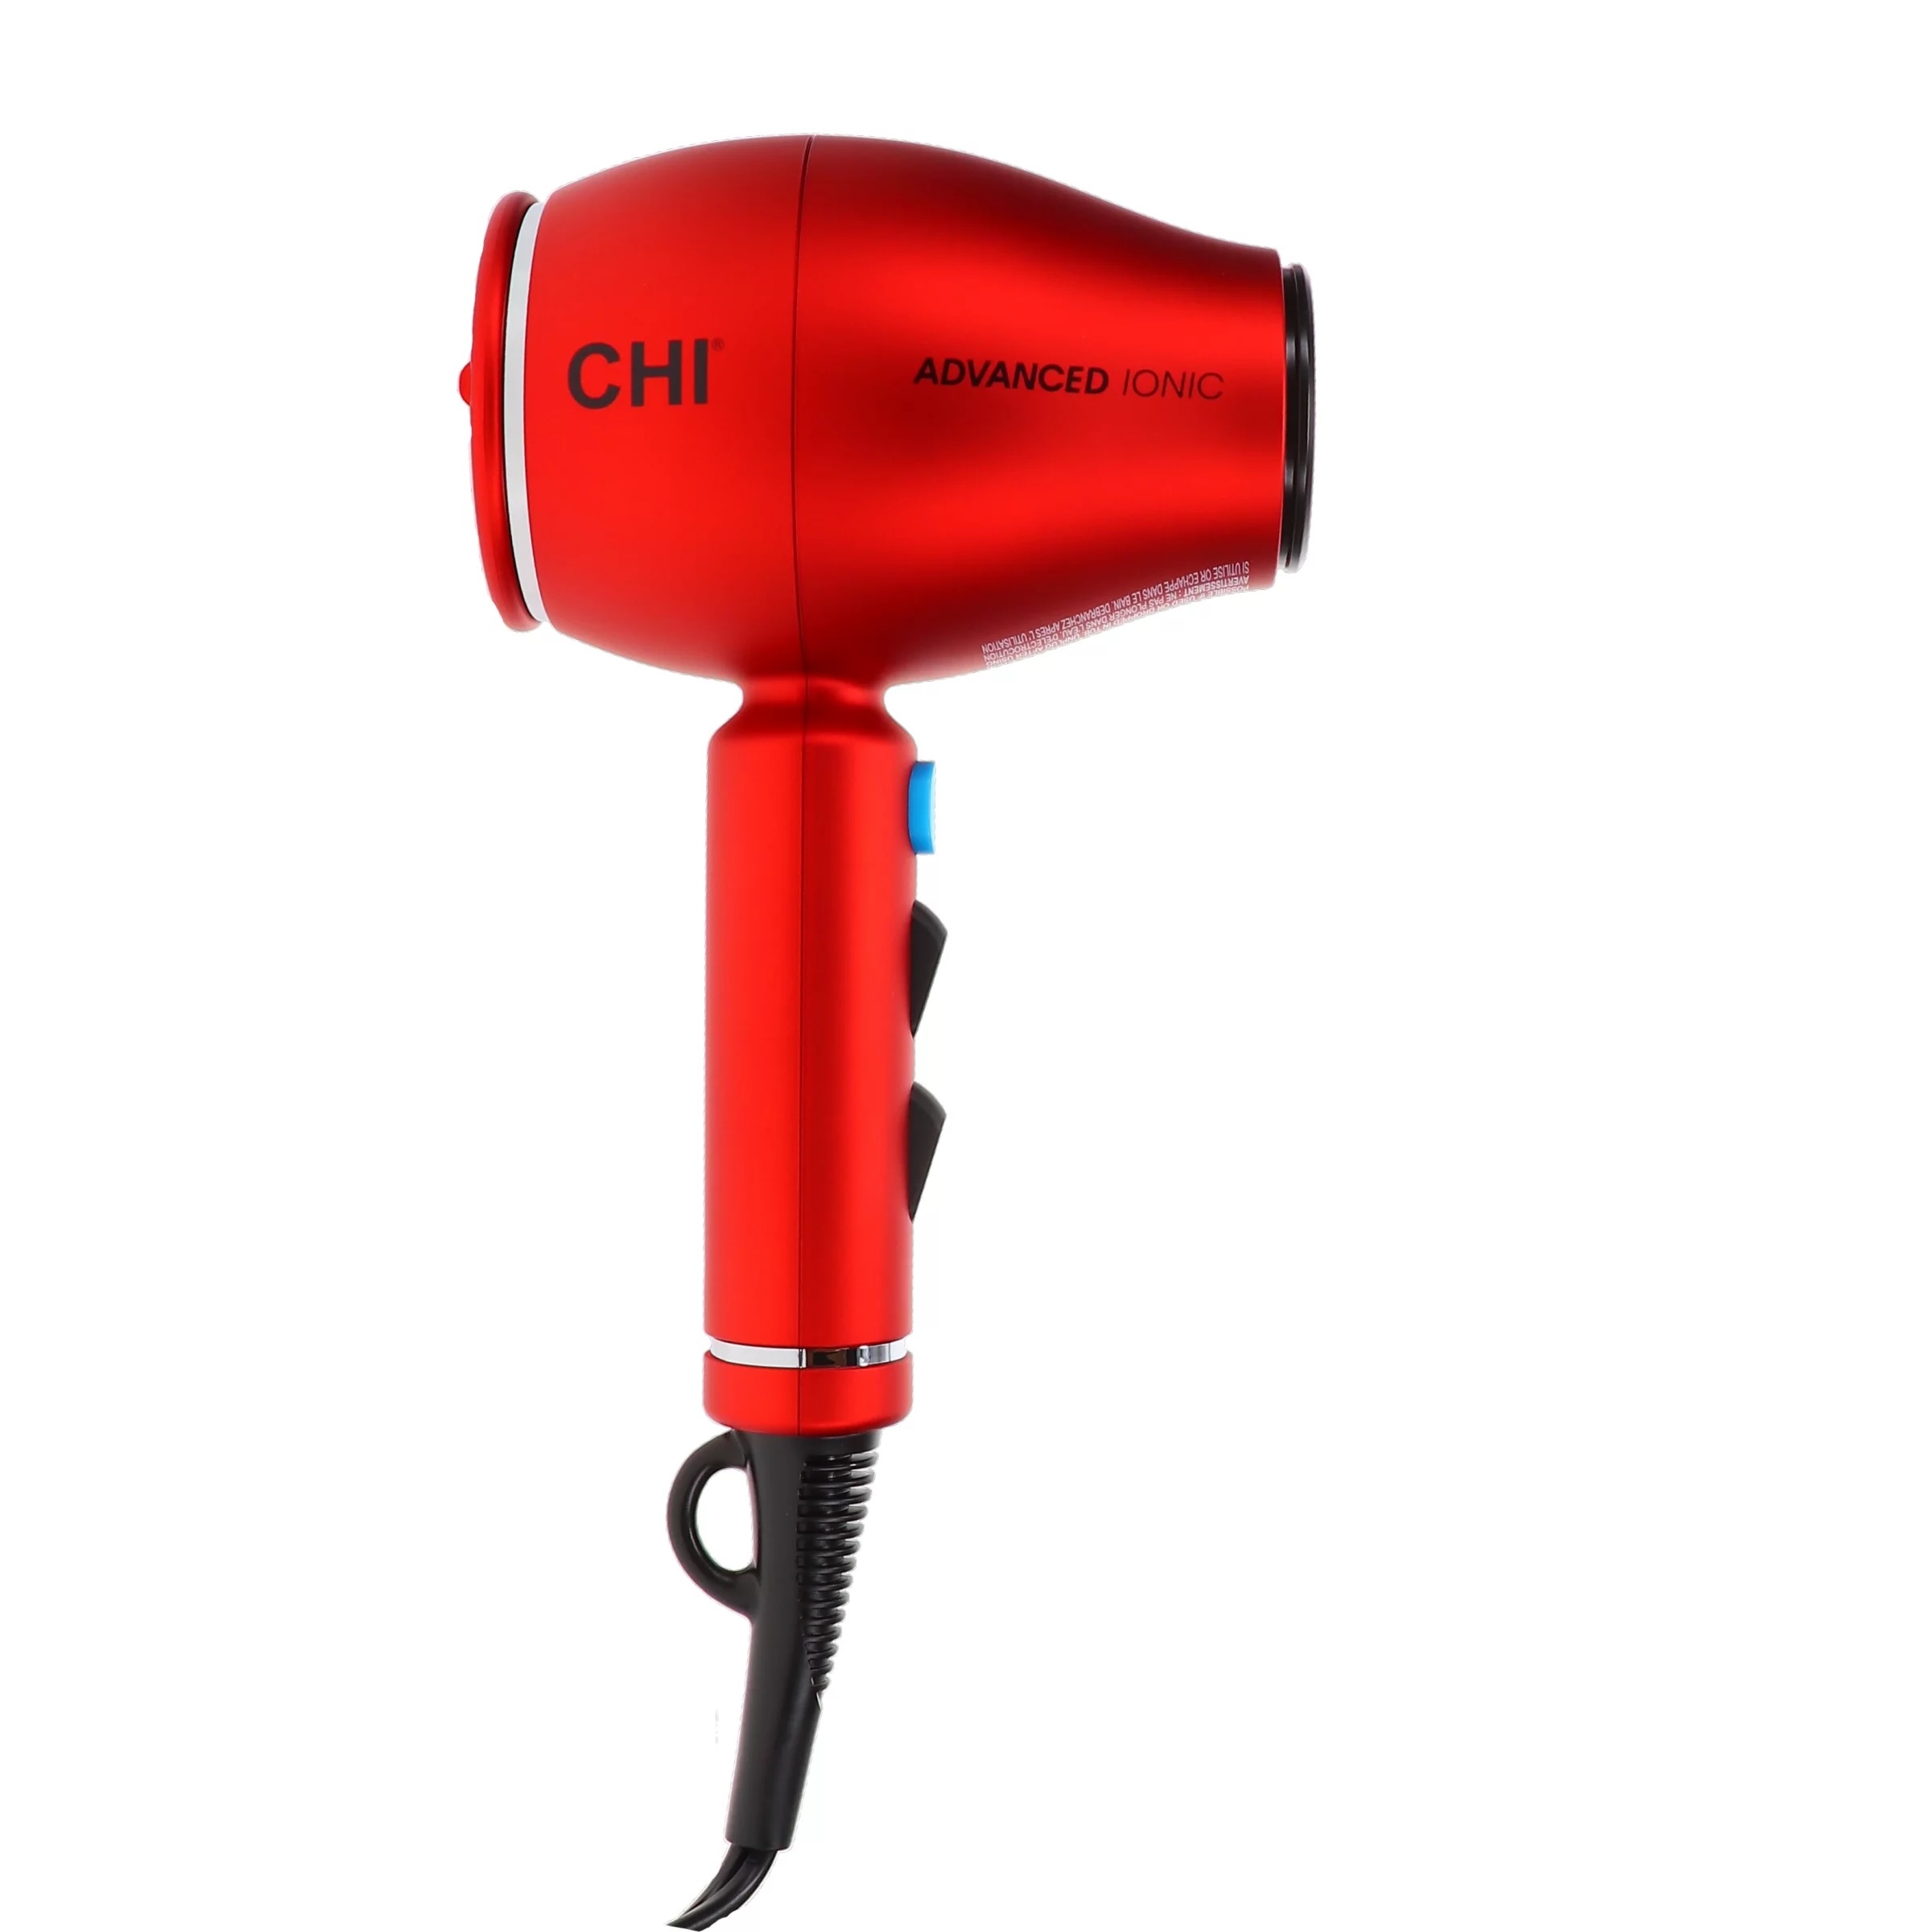 What Is The Best Chi Hair Dryer